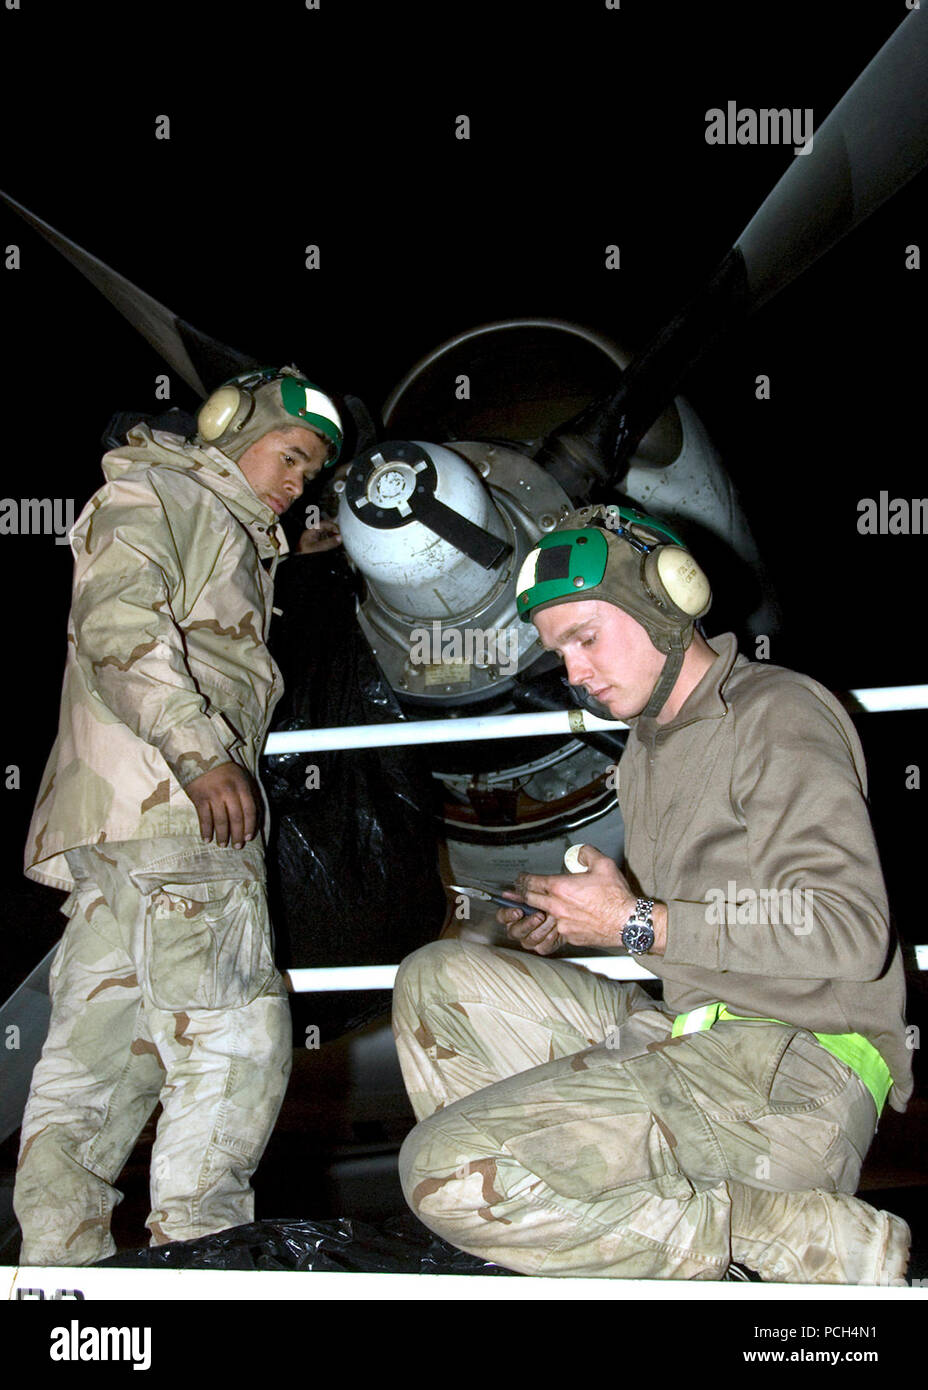 Aviation machinist's mate Airman Zechariah Edwards and aviation machinist's mate Petty Officer 3rd Class Daniel Childress perform maintenance on the engine of a P-3C Orion aircraft. Aircraft maintainers are working throughout the night to keep the planes mission ready. Stock Photo